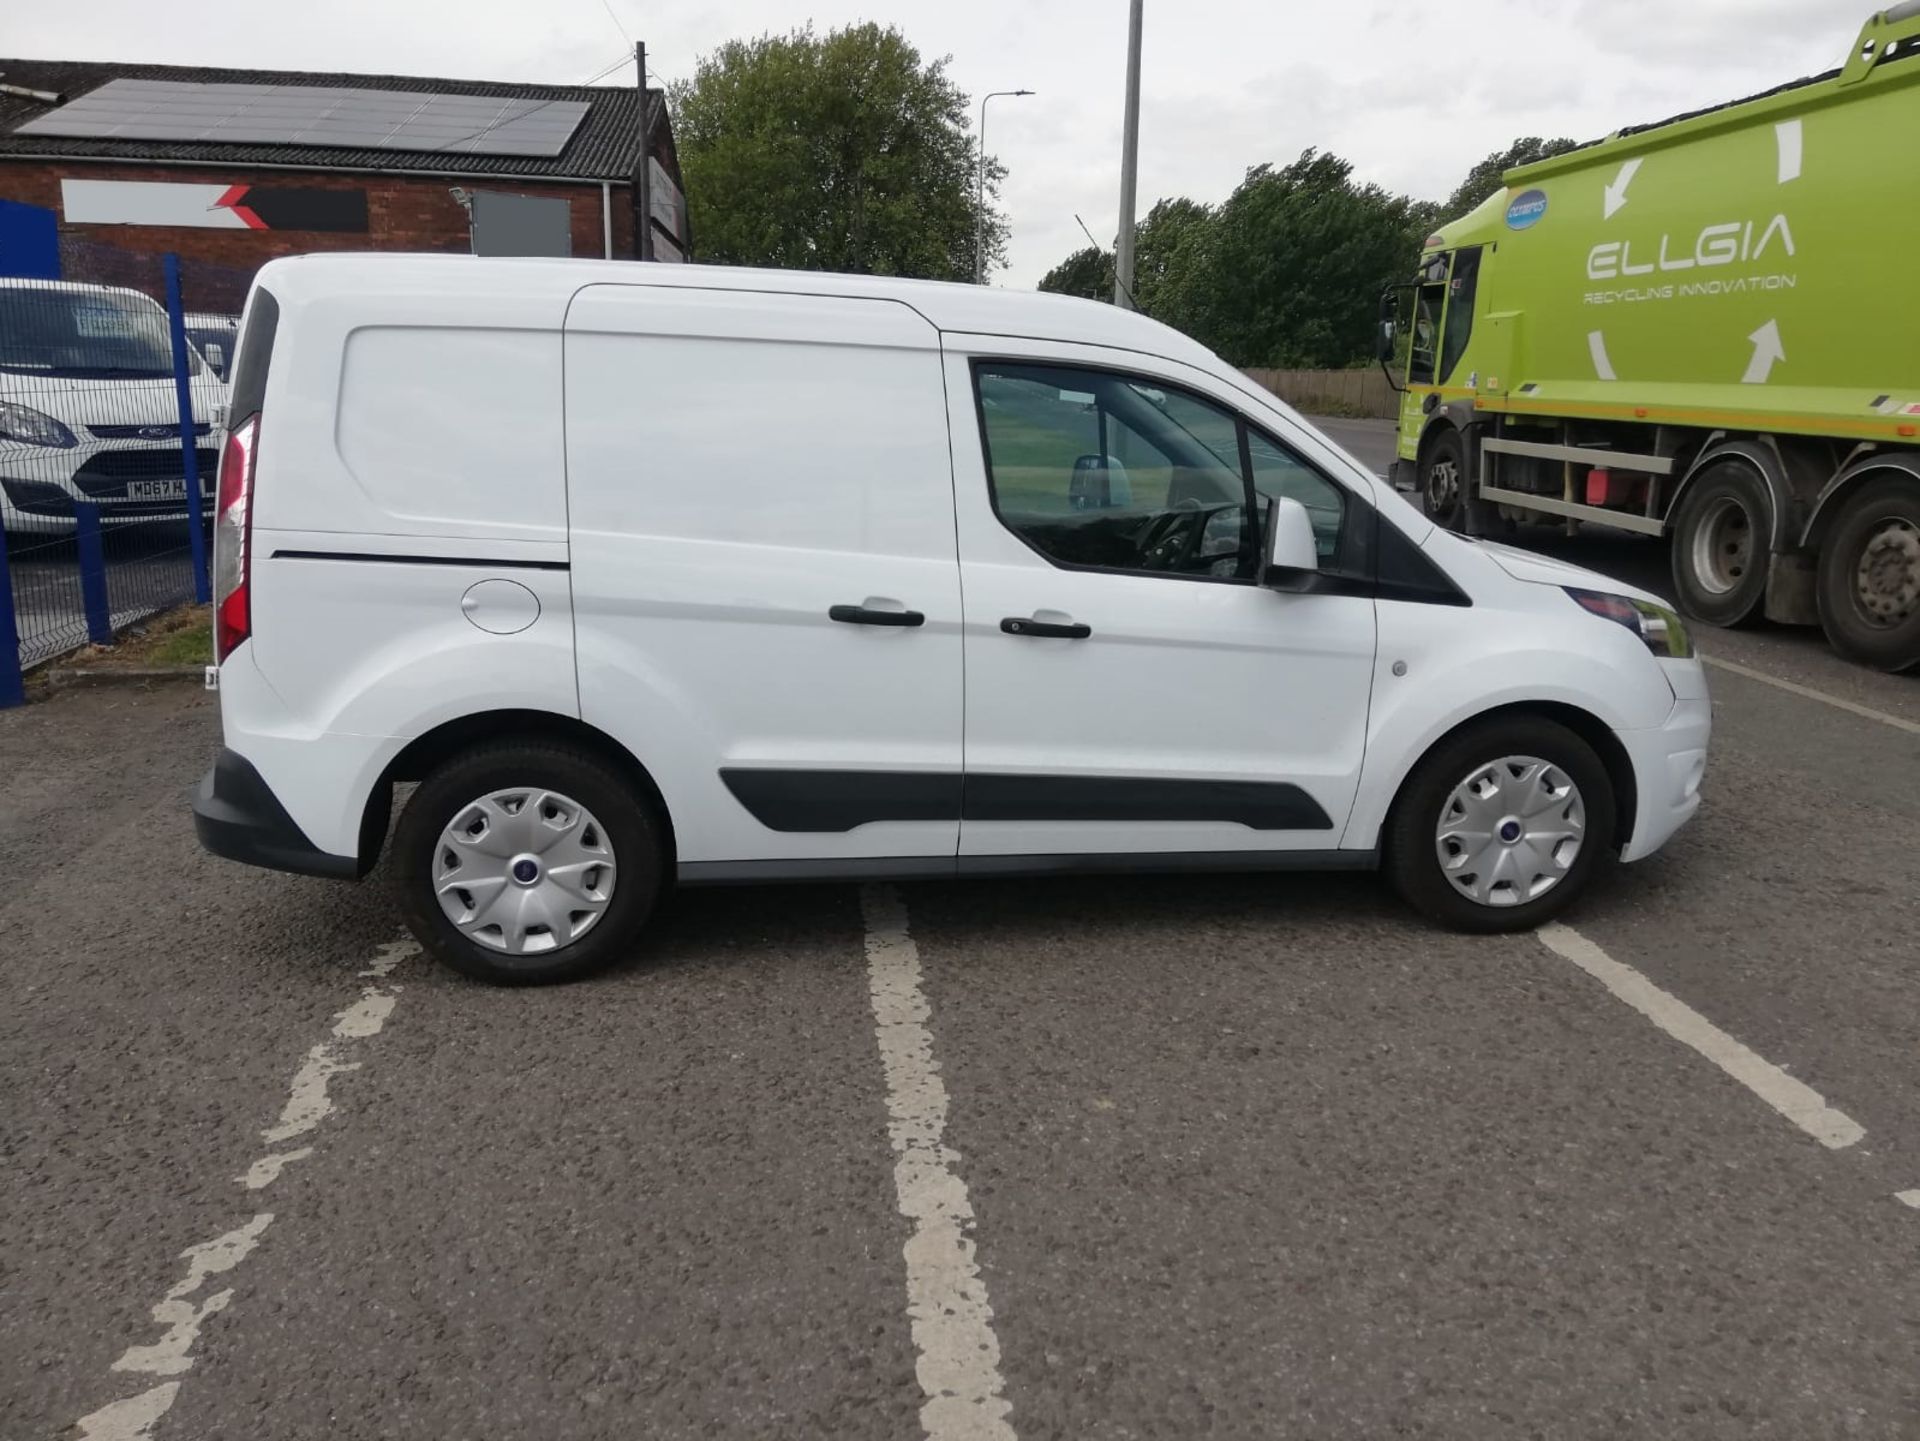 2018/67 FORD TRANSIT CONNECT 220 CREW CAB, 86K MILES WITH PART HISTORY *PLUS VAT* - Image 7 of 10